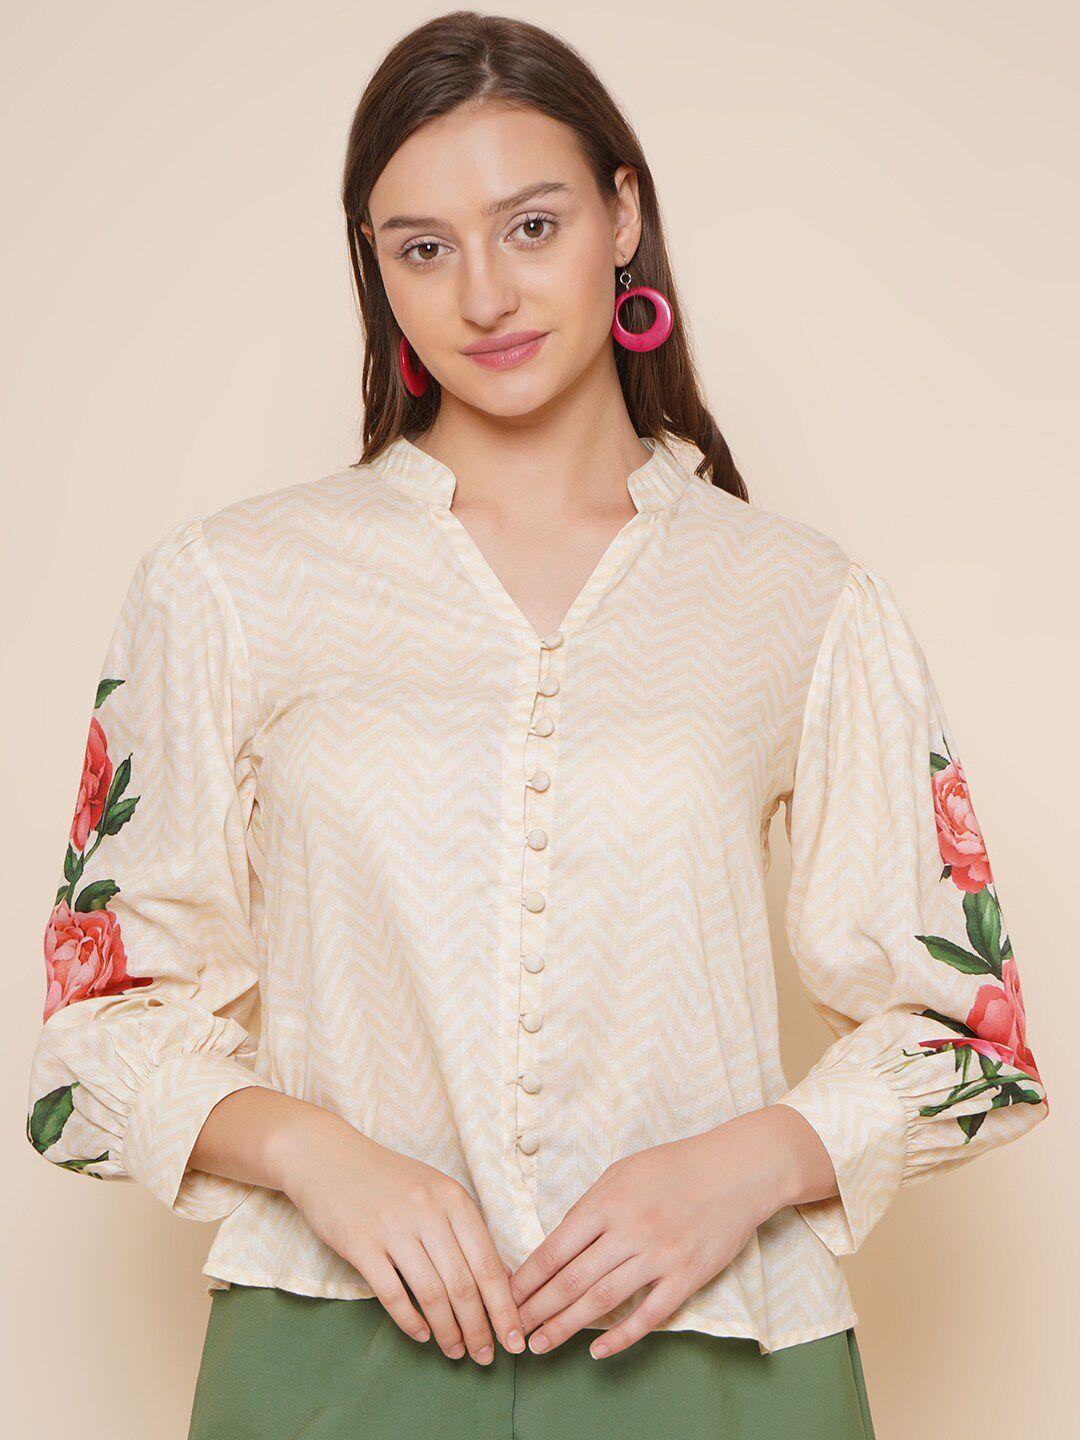 bhama-couture-floral-printed-mandarin-collar-puff-sleeve-shirt-style-top